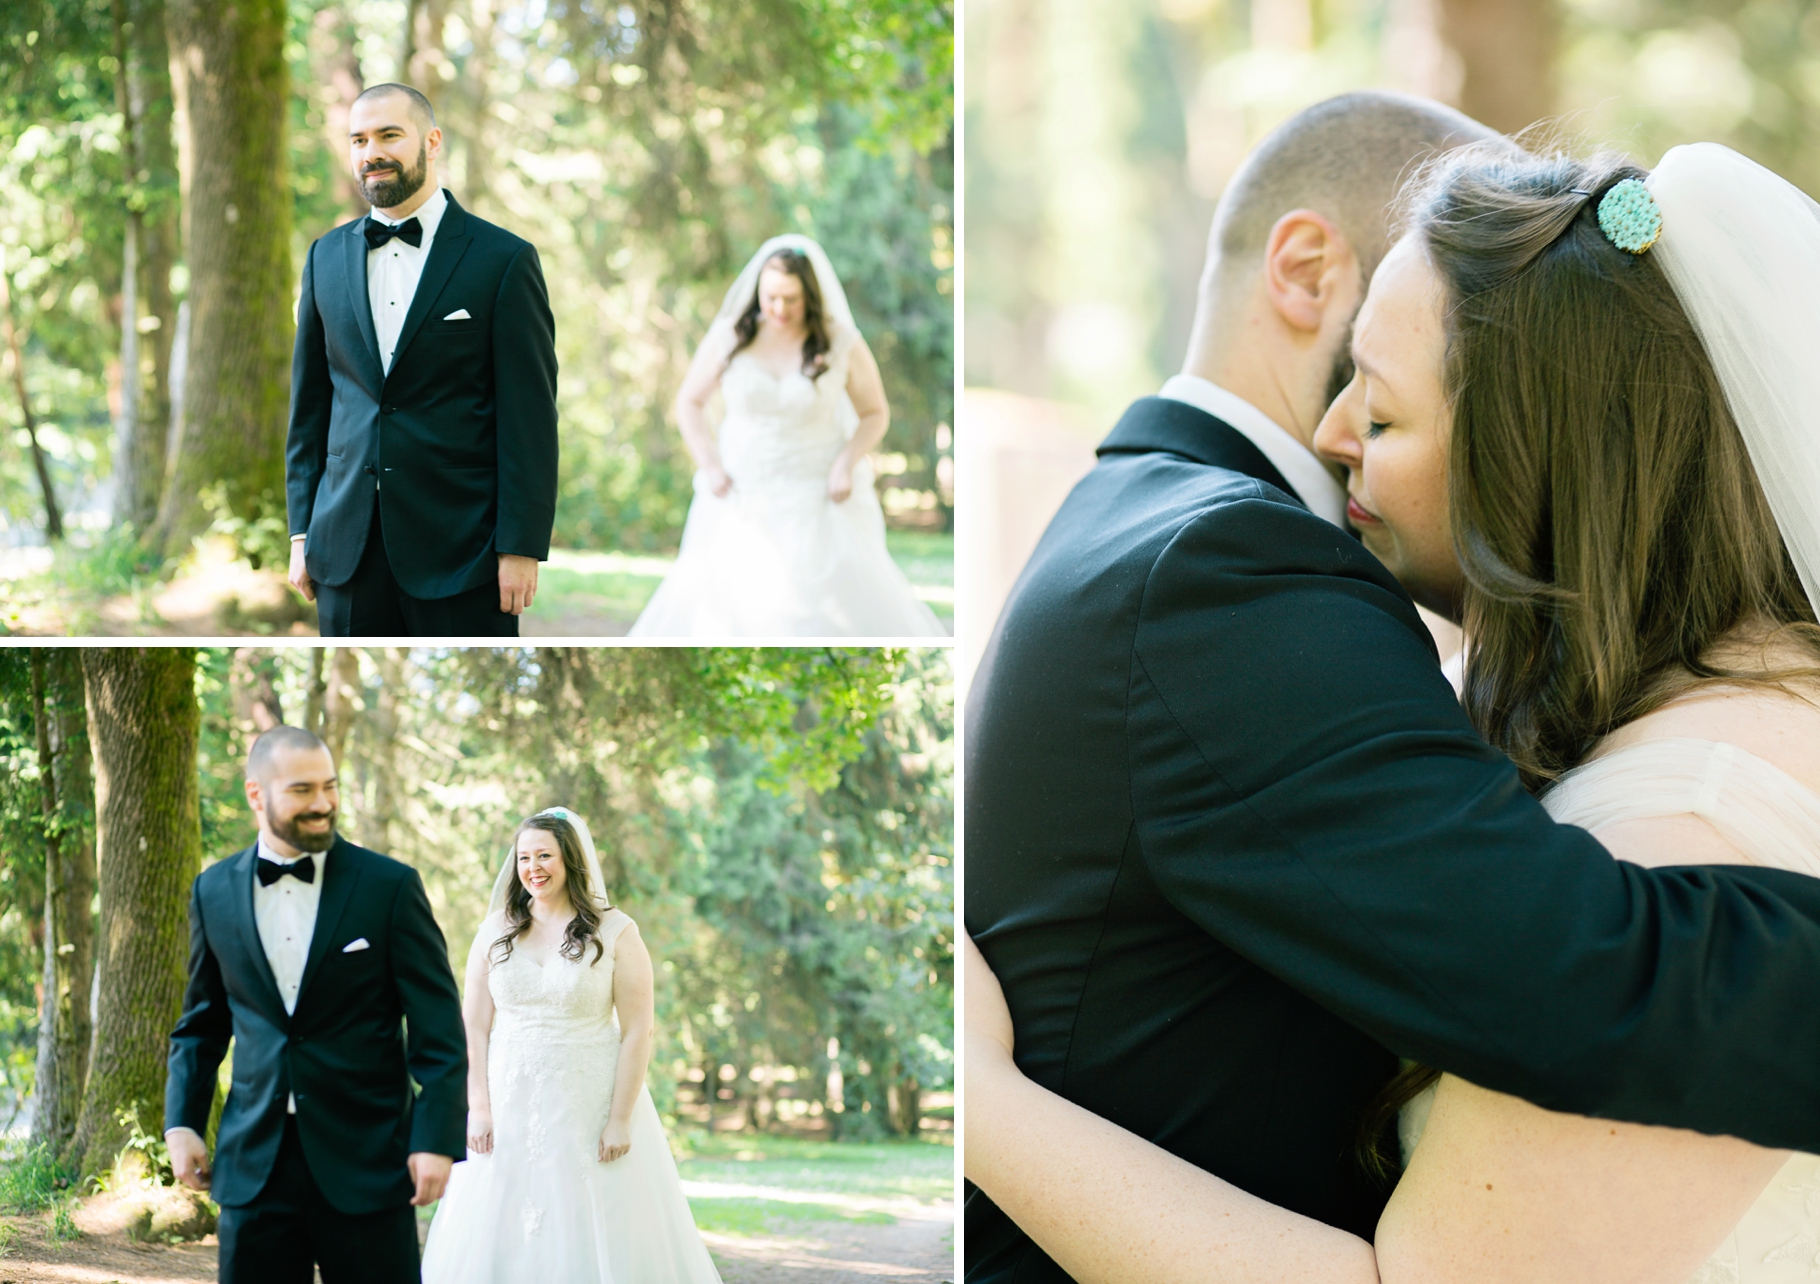 12-First-Look-Bride-Groom-Woodland-Park-Seattle-Wedding-Photographer-Photography-by-Betty-Elaine